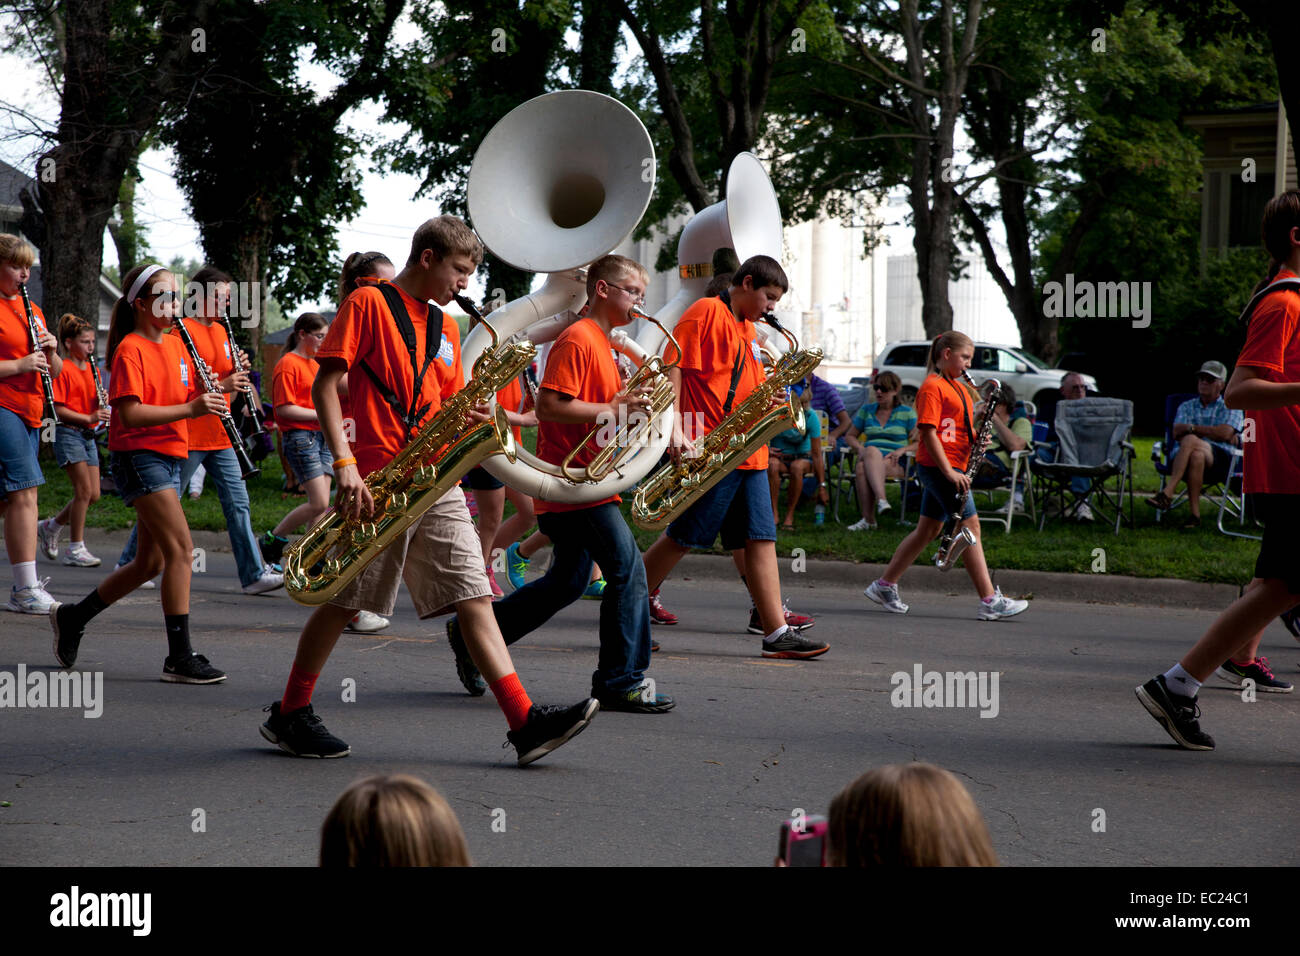 High school marching band in a parade Stock Photo